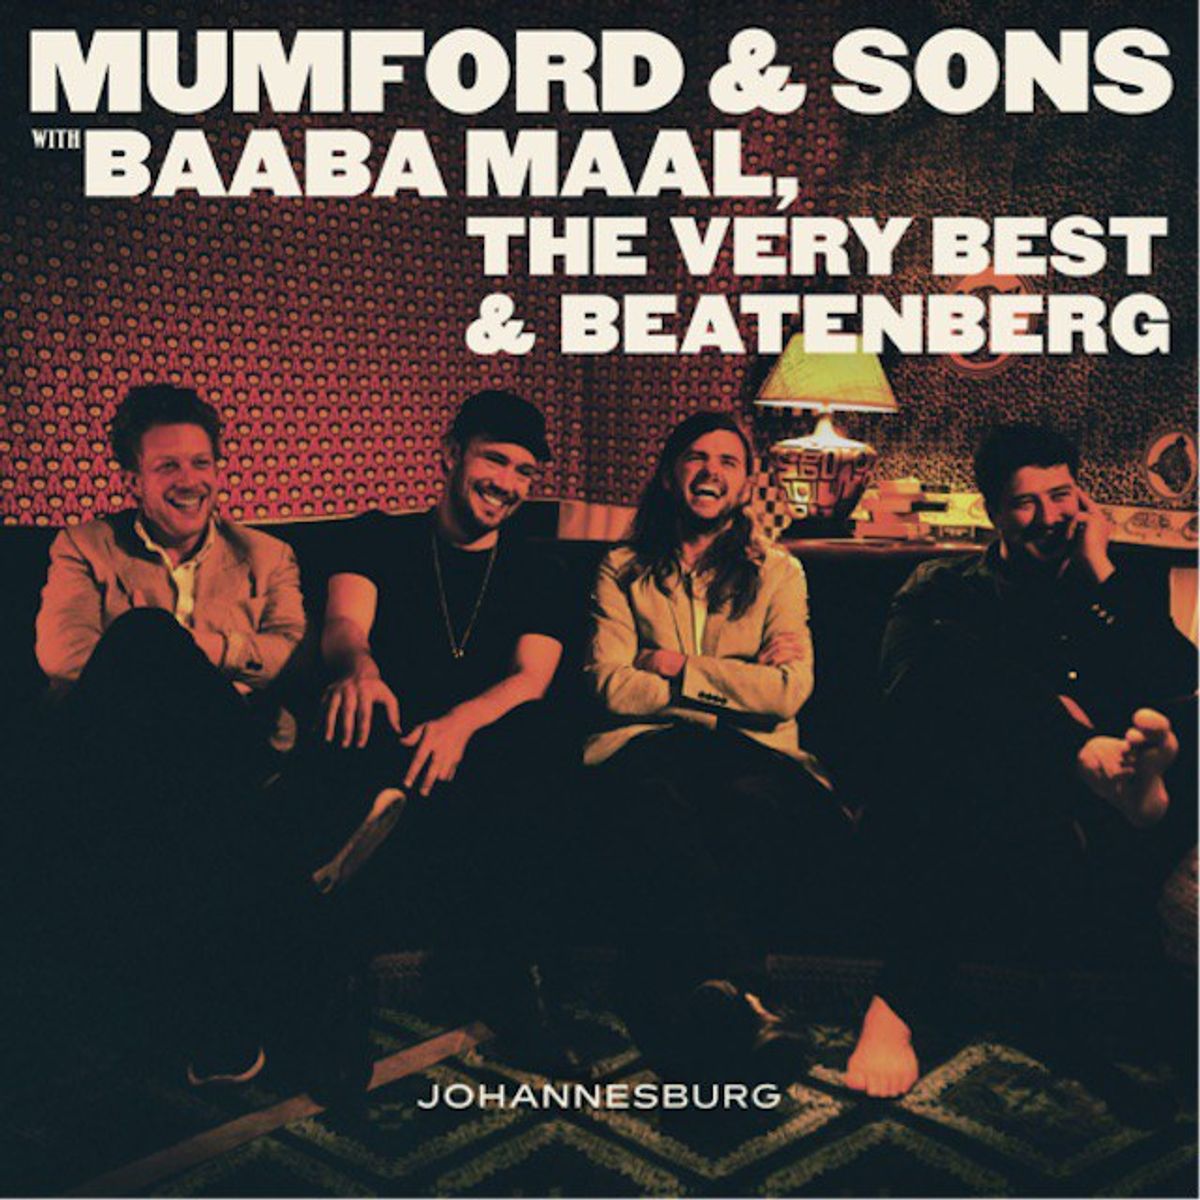 Why Mumford & Sons' "Johannesburg" Is A Playlist Must